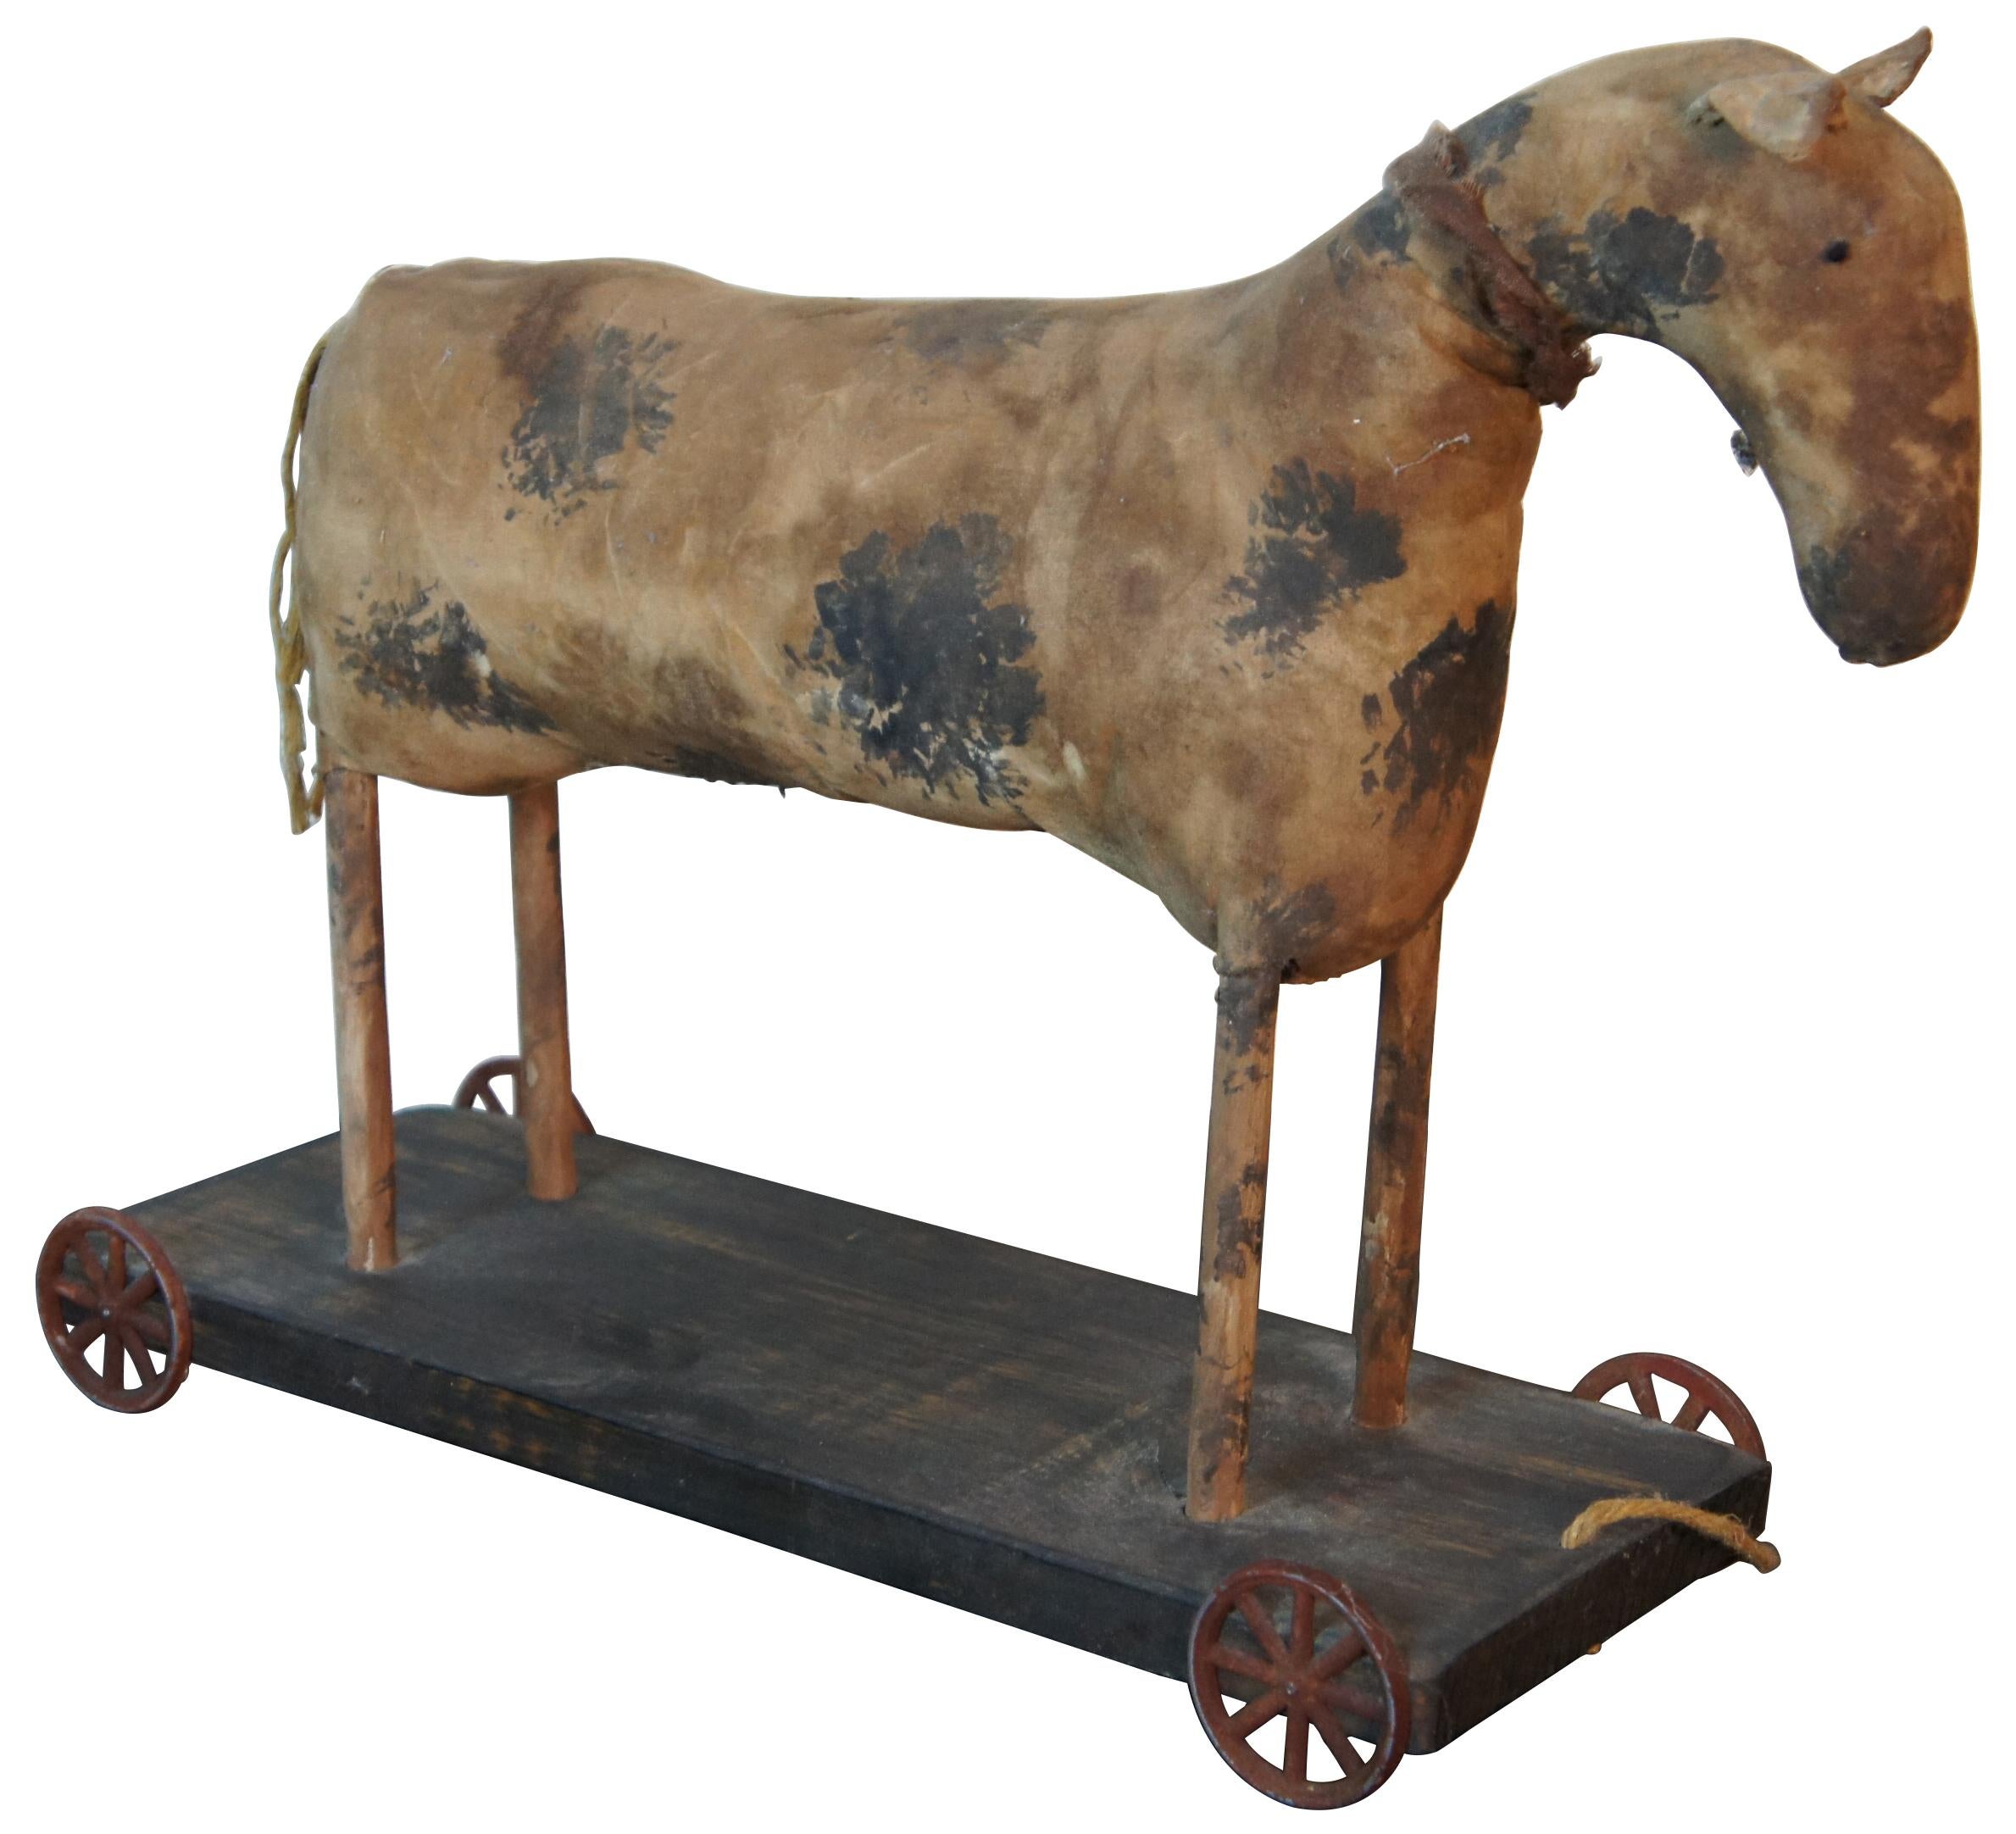 Antique Americana black and white spotted stuffed horse wheeled pull toy. Mounted to a pine base. Measures: 16